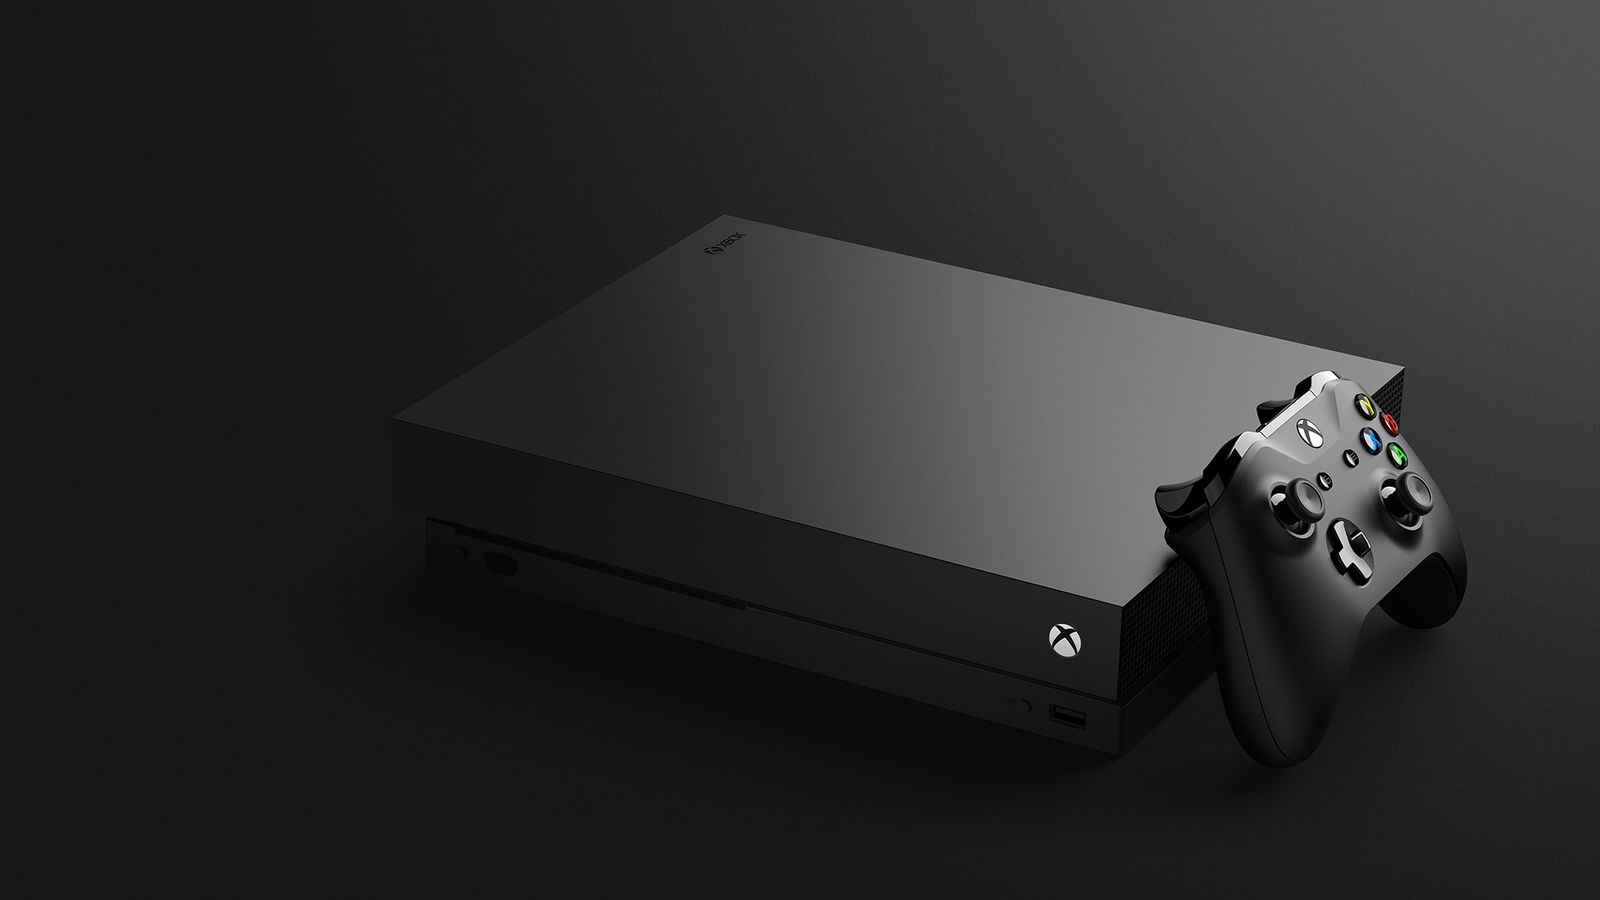 The world's most powerful console, Xbox One X, launches in India